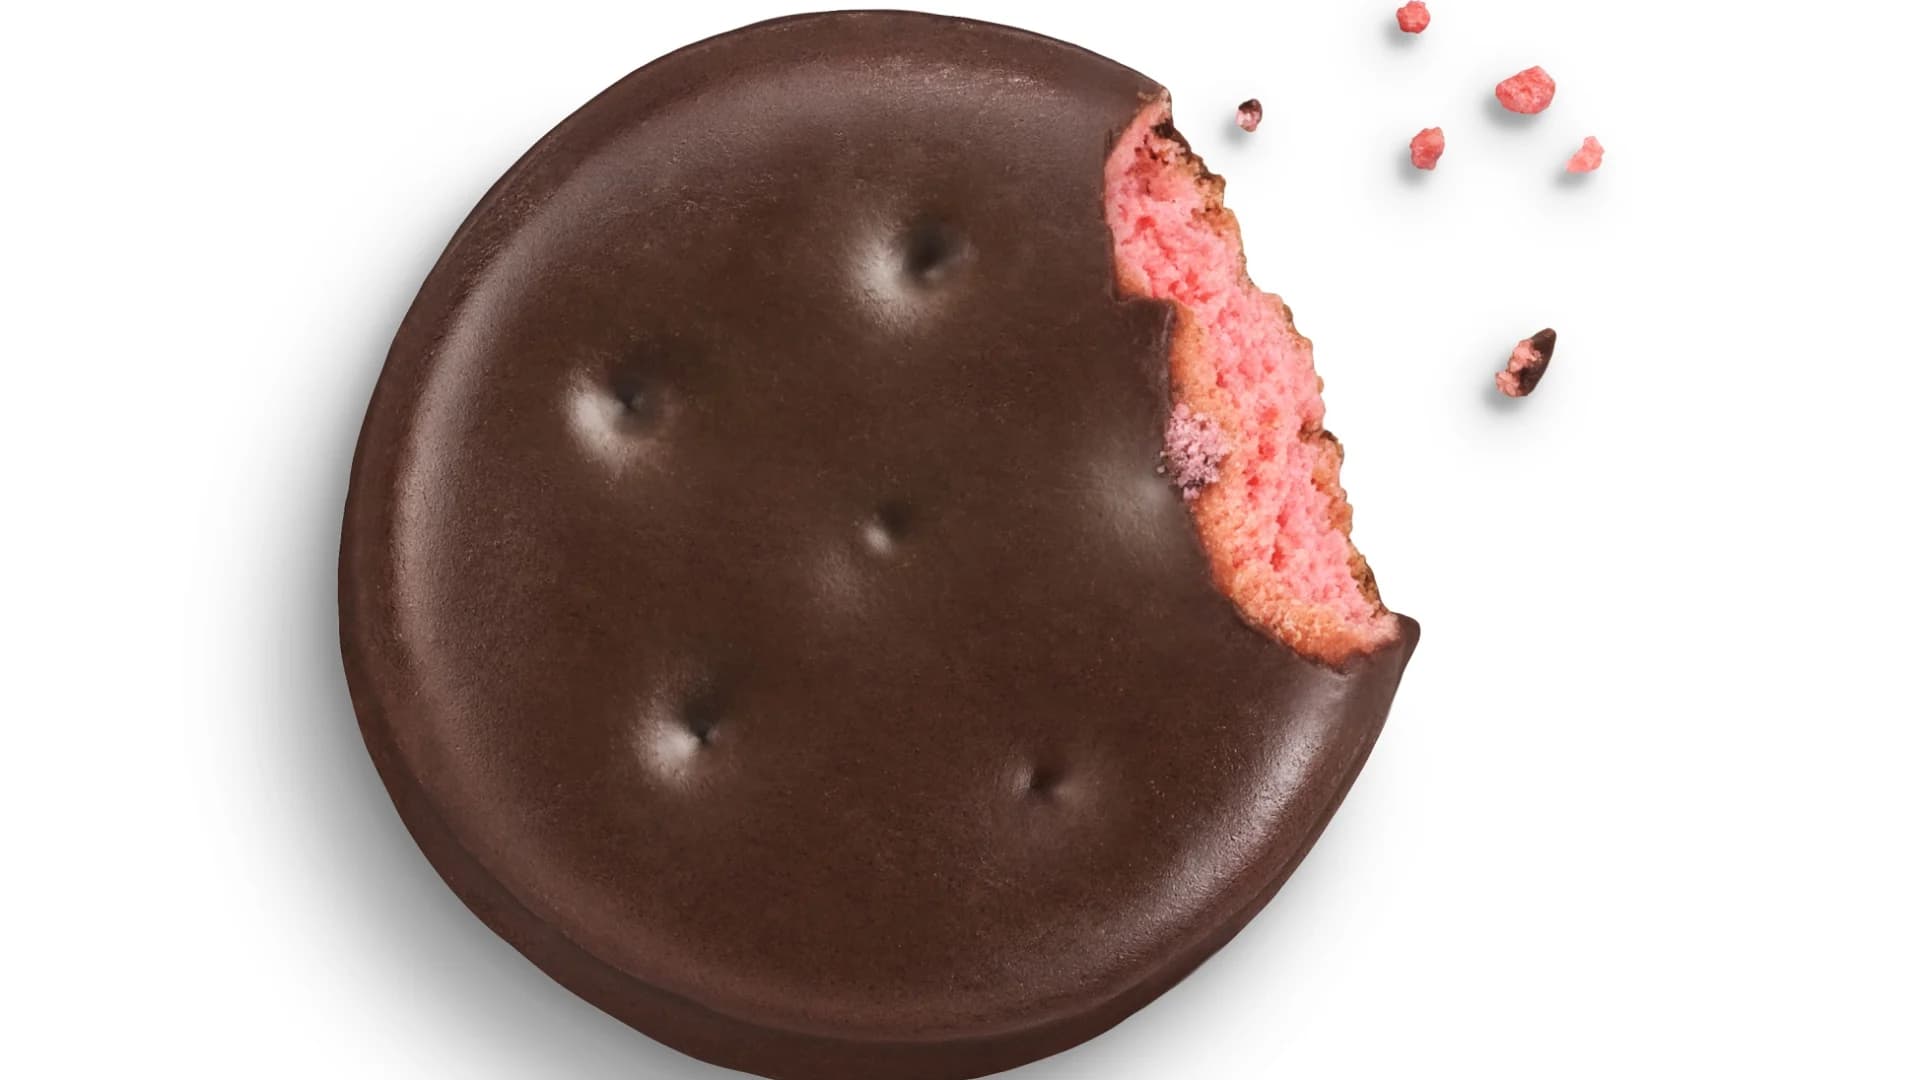 Raspberry Rally, a ‘sister’ to Thin Mints, joins Girl Scouts’ family of cookies